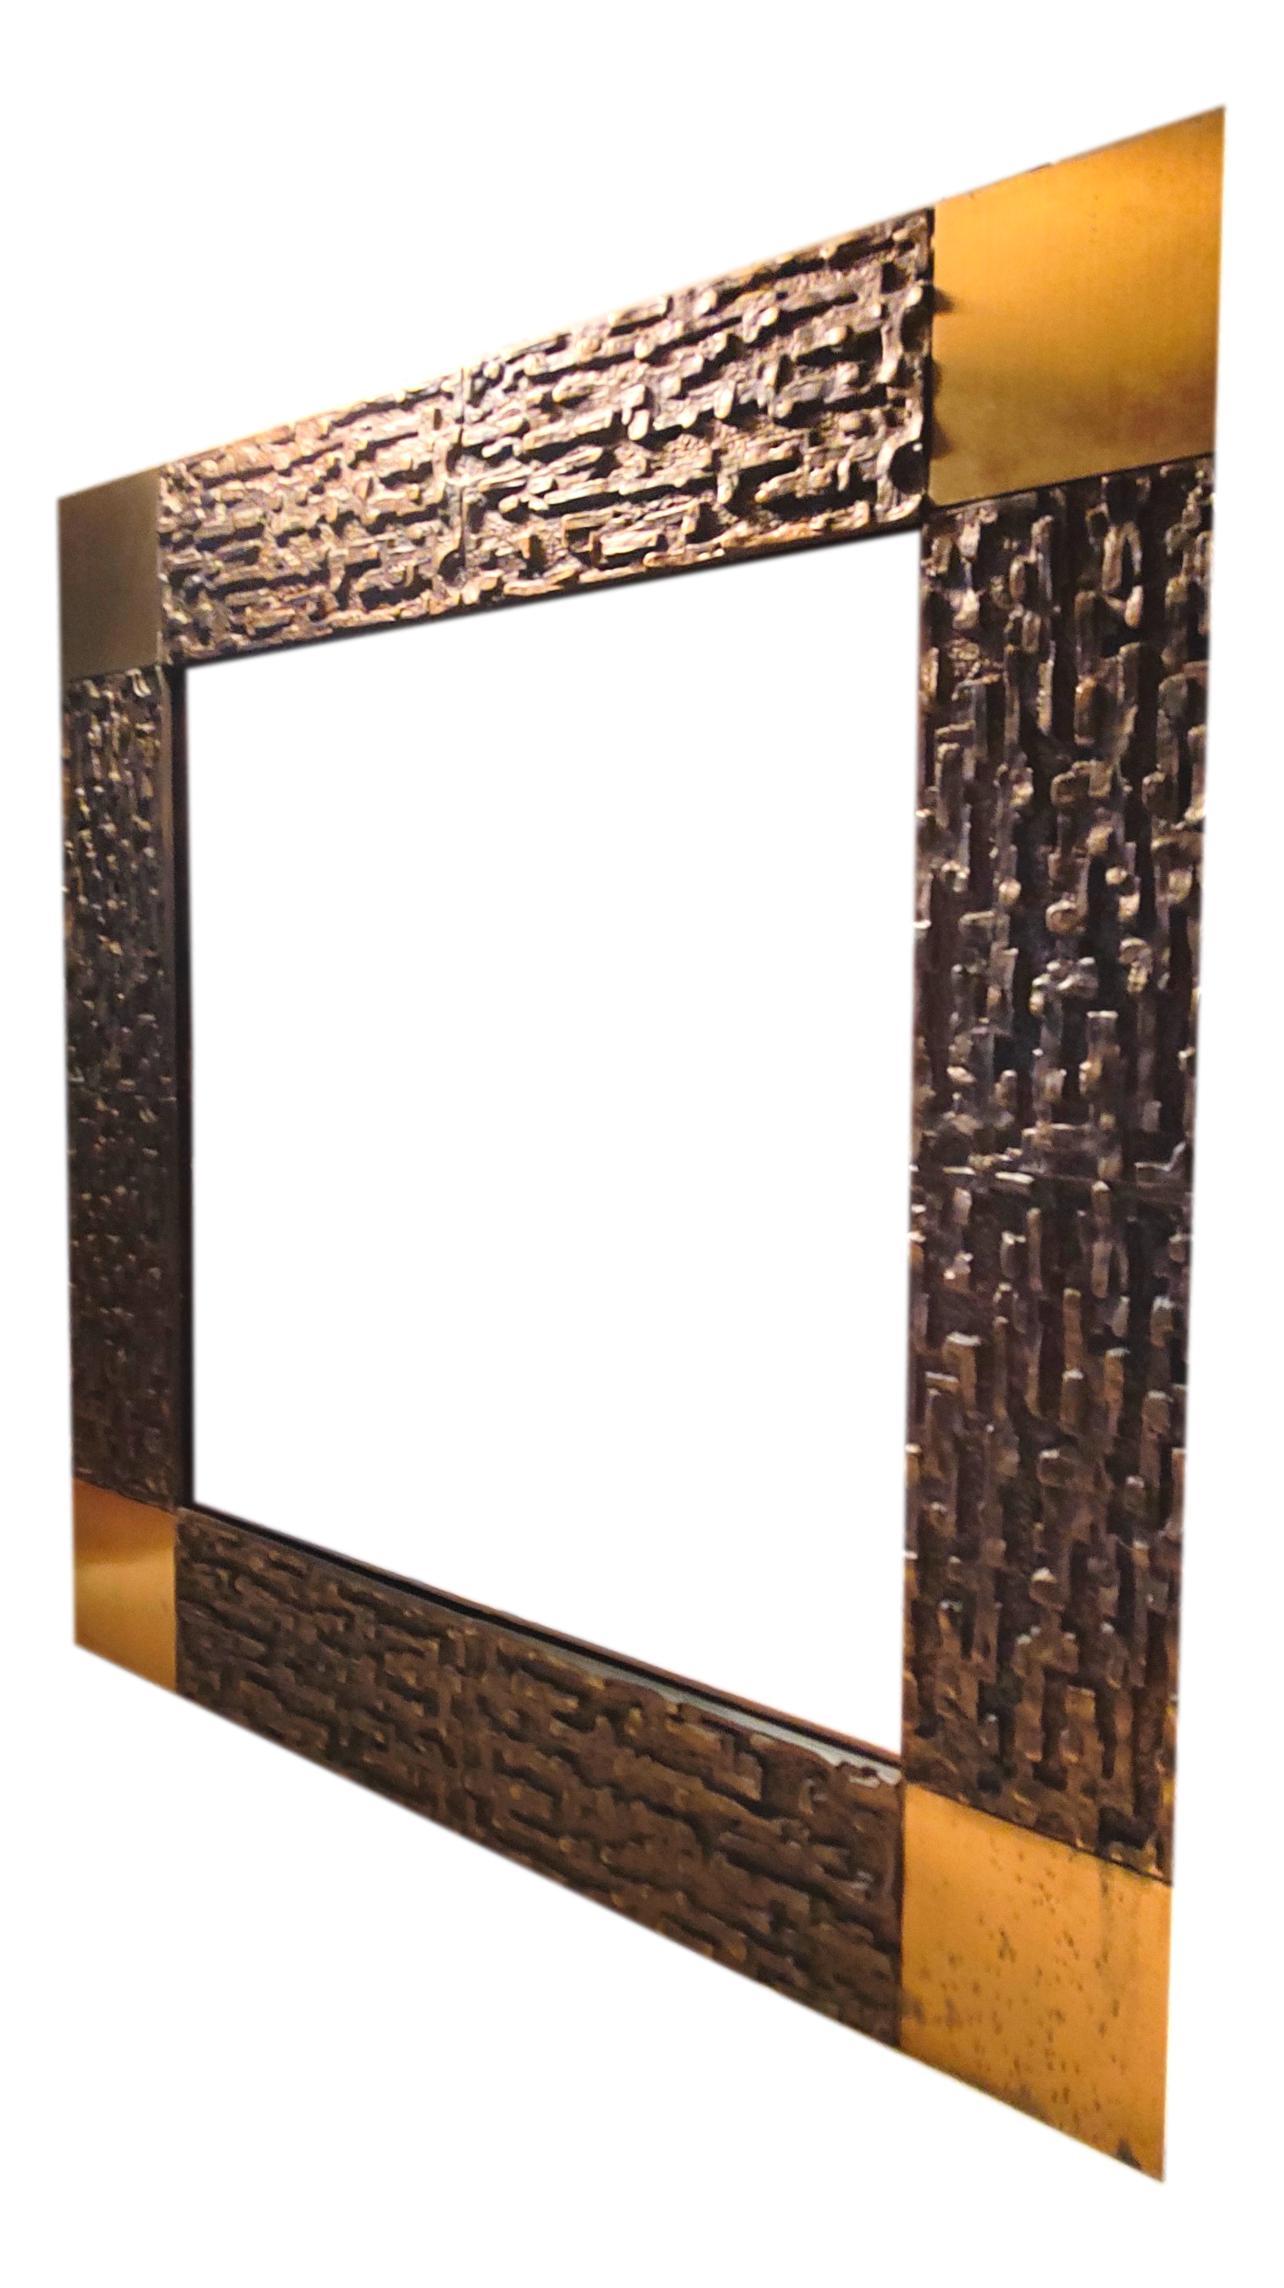 original brutalist mirror from the 1970s, designed by luciano Frigerio, made with a bronze sculptural frame.
Measuring 71x71 cm, in very good condition, as pictured